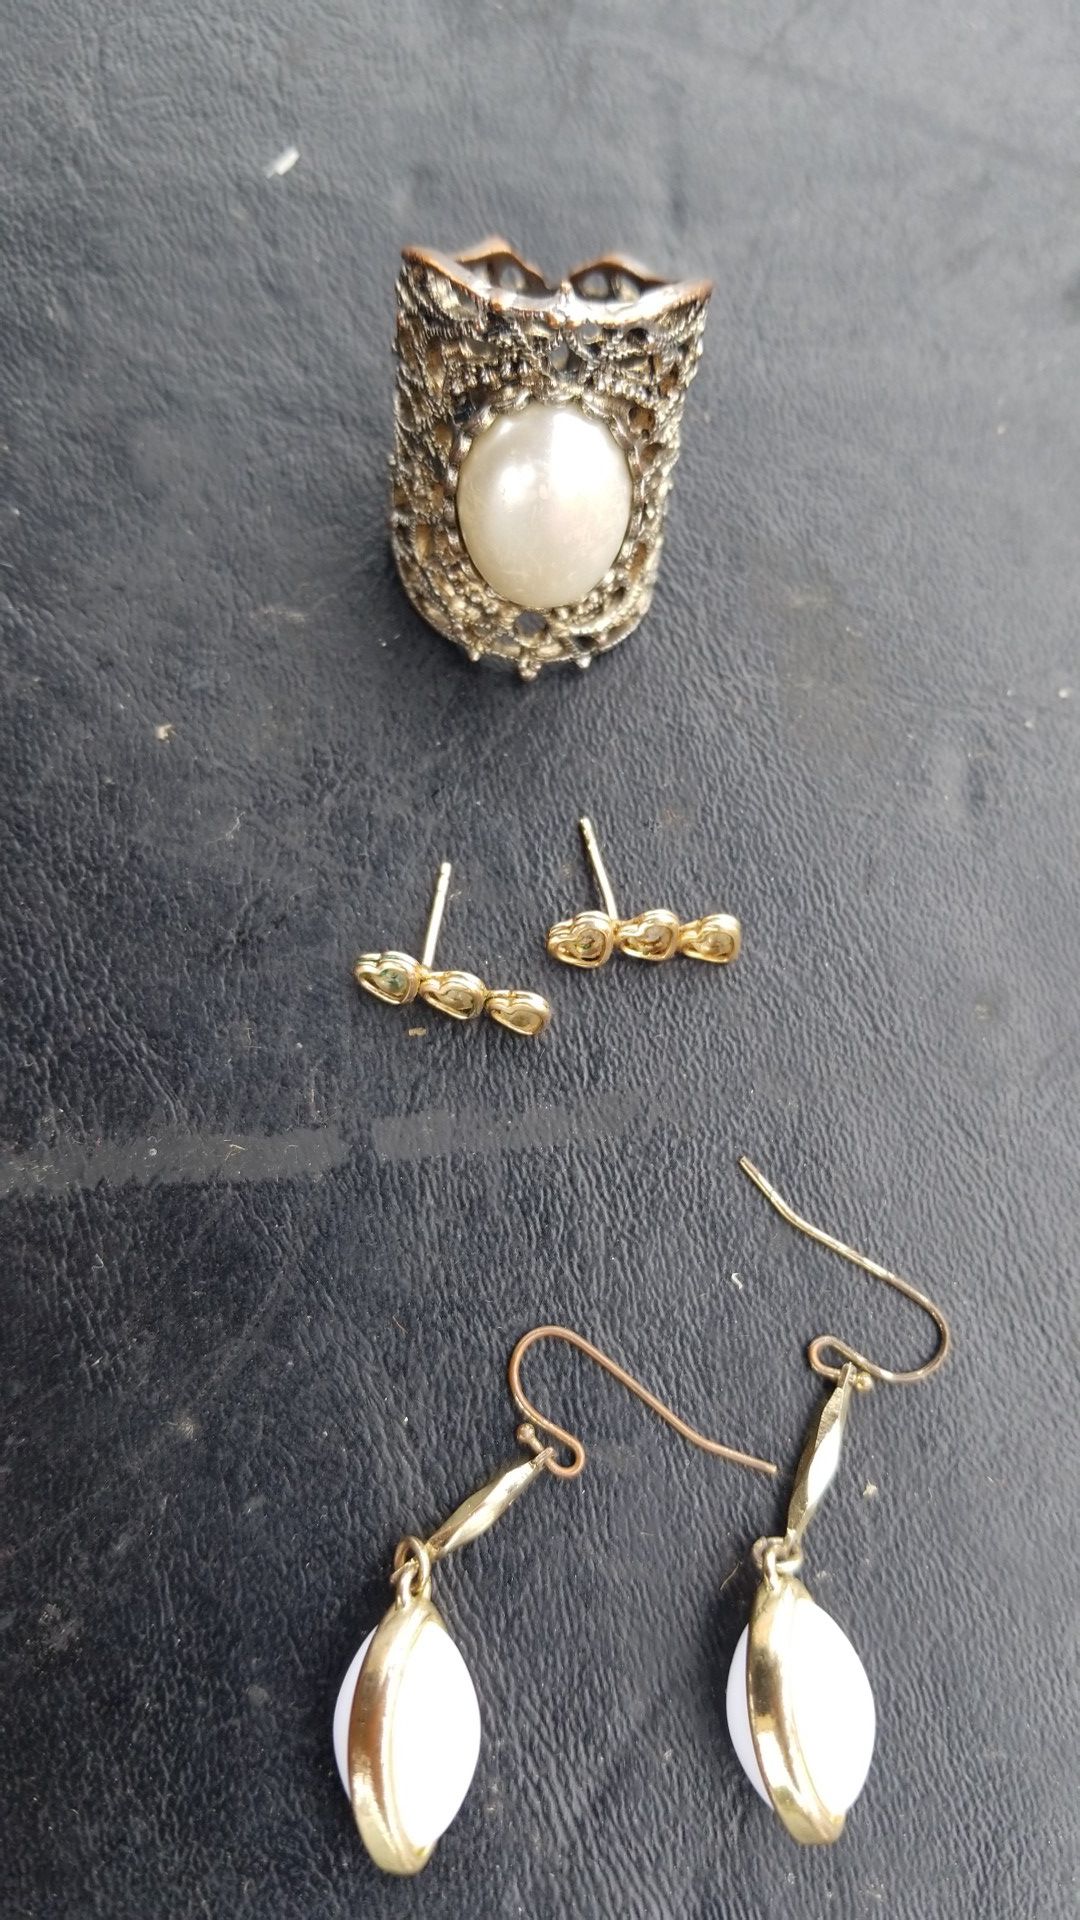 Earnings and a ring $1 each